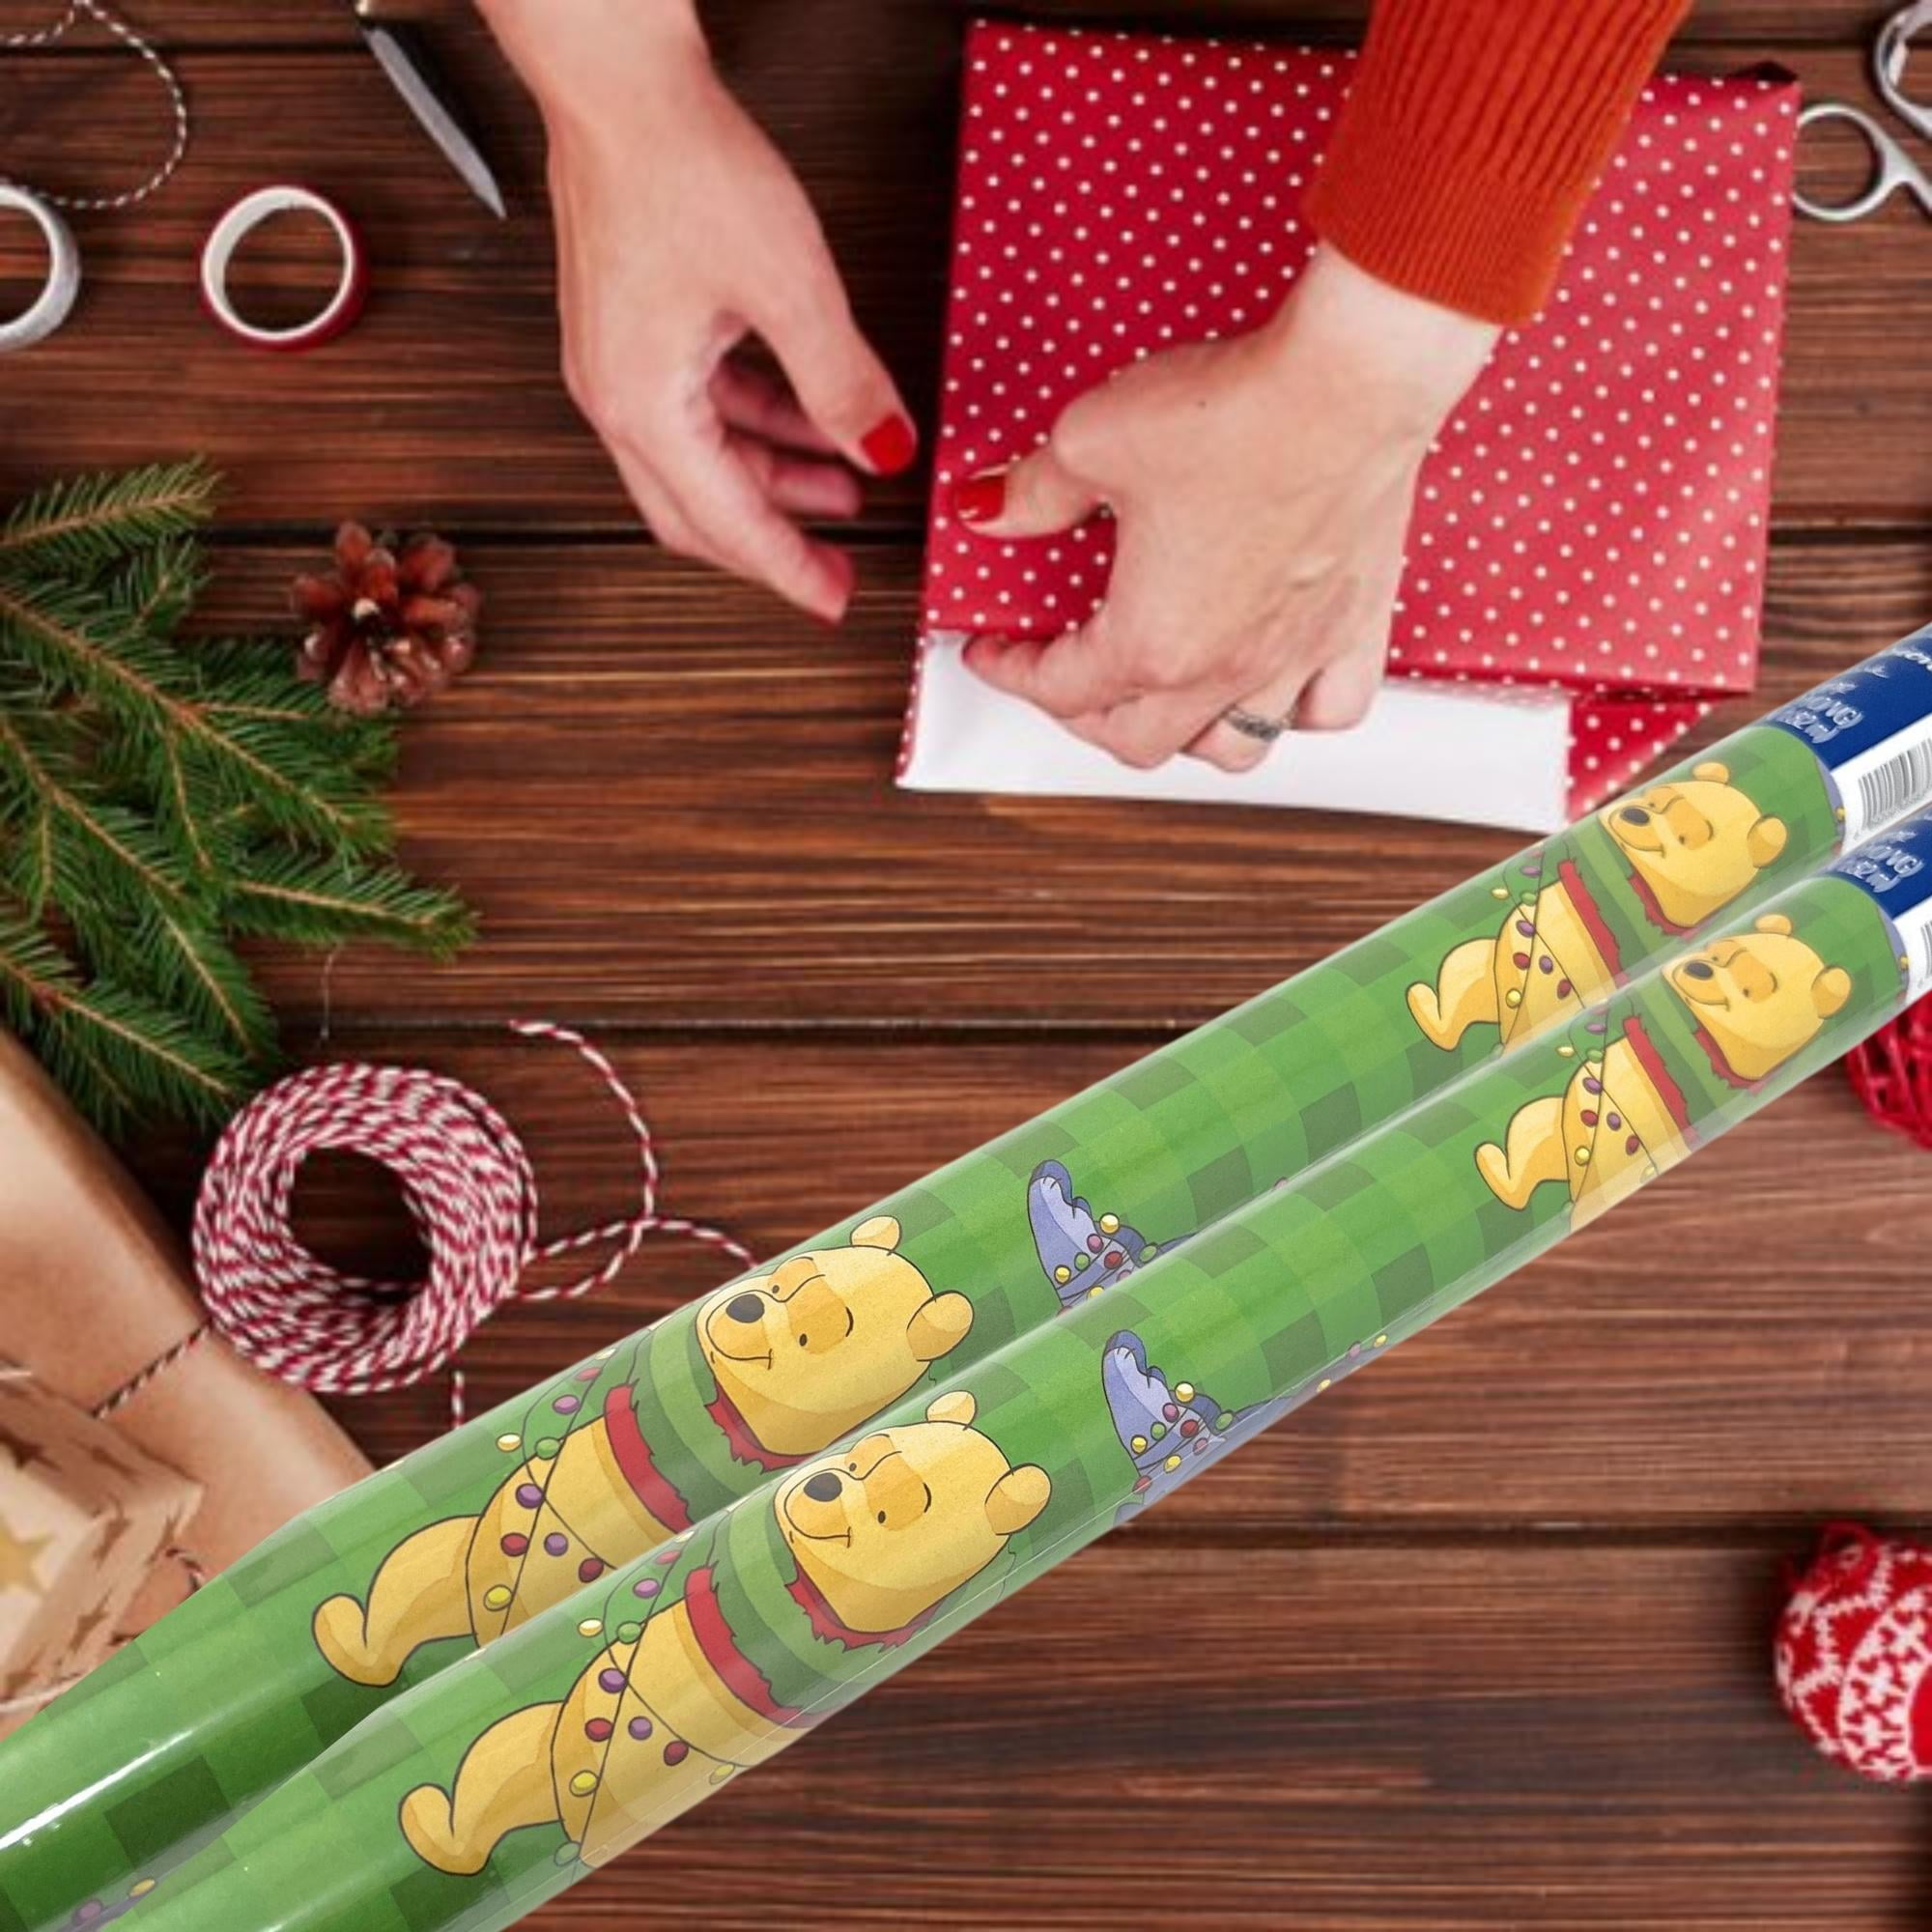 Winnie The Pooh Wrapping Paper, Tear Resistant Premium Gift Cover